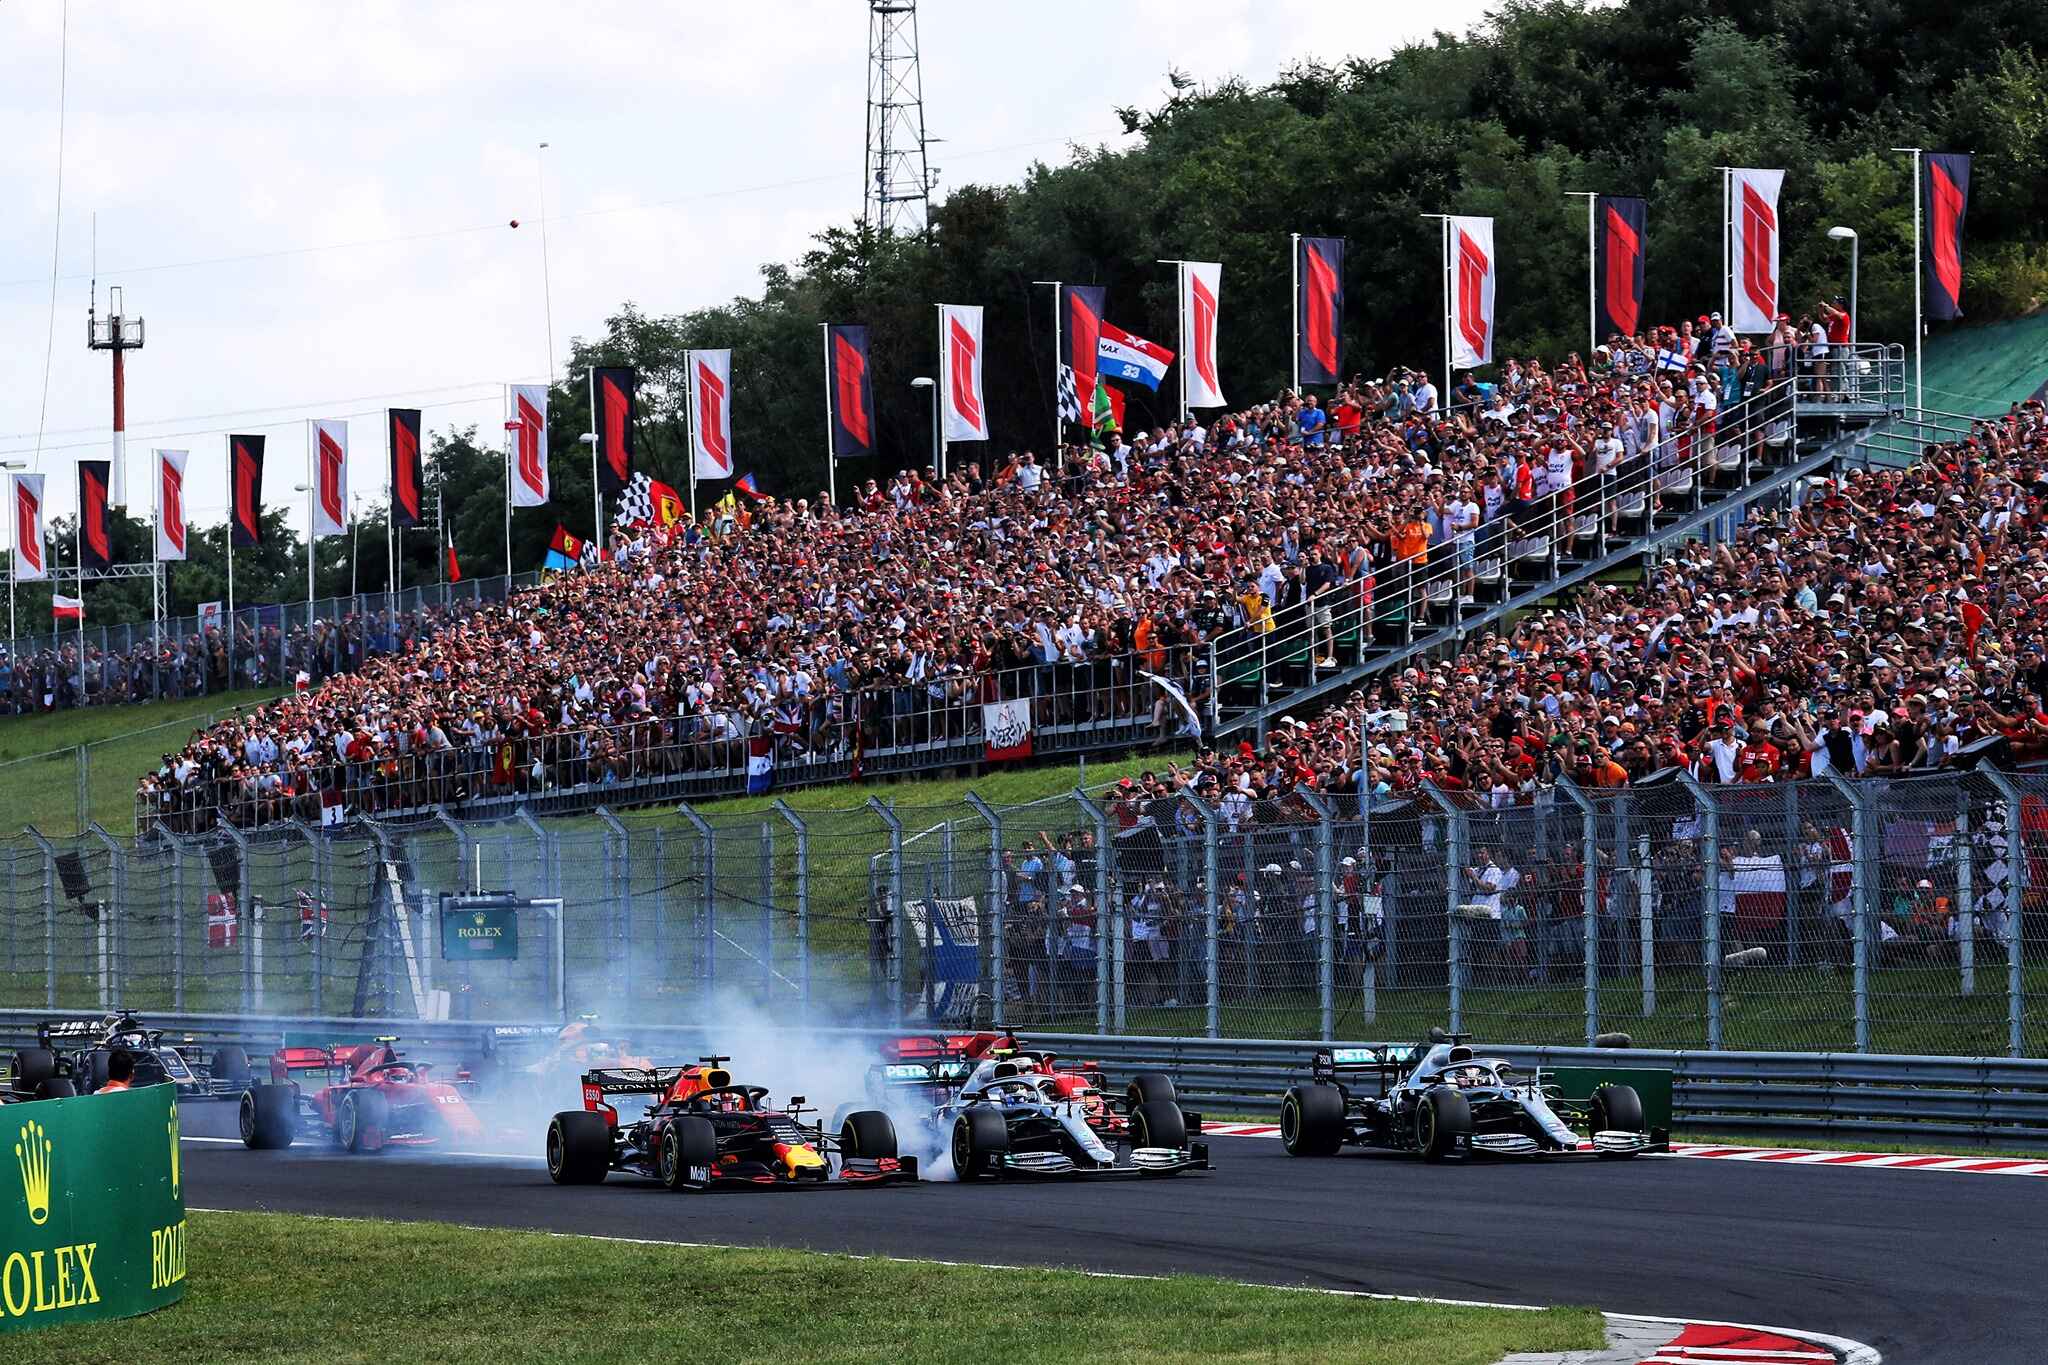 16-facts-about-hungarian-grand-prix-formula-1